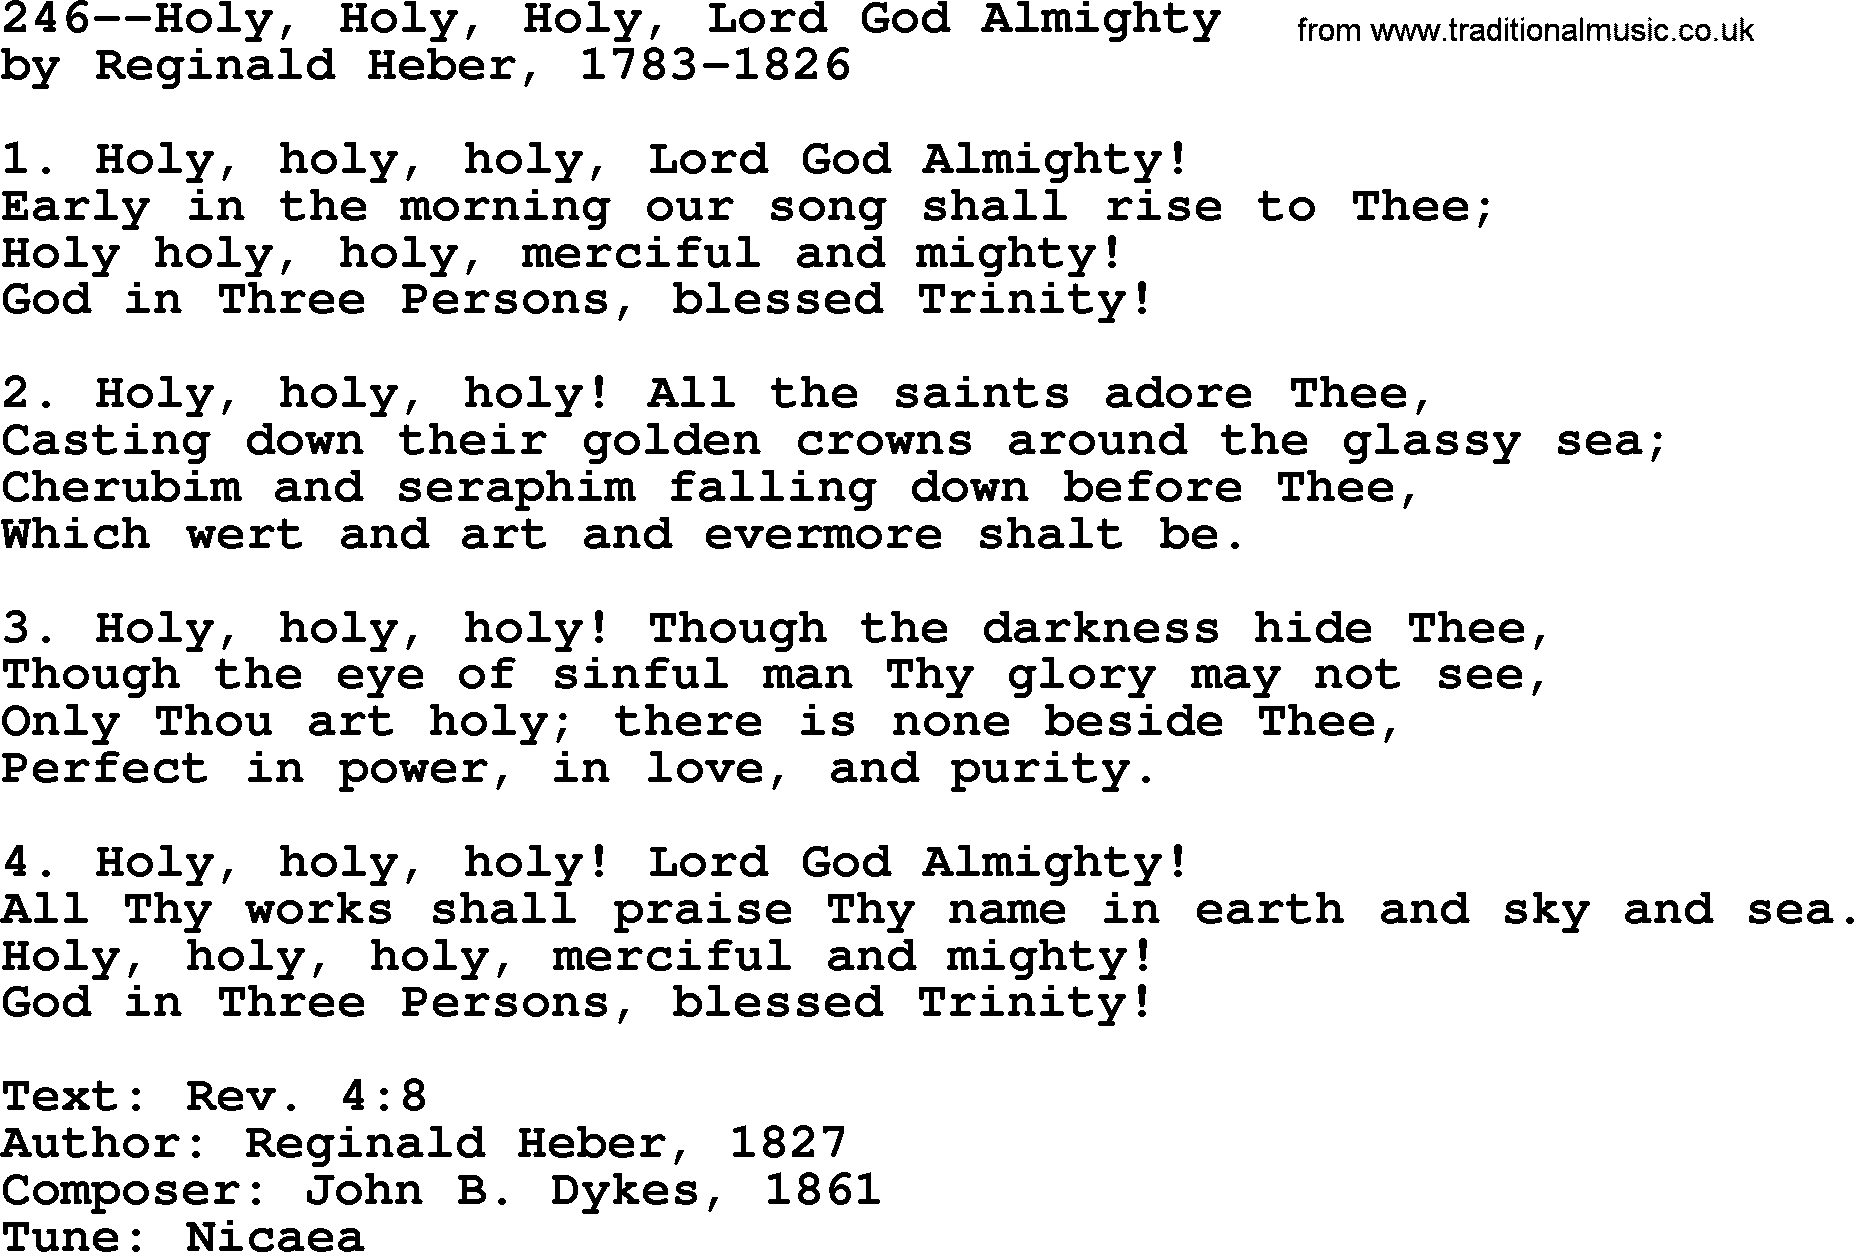 Lutheran Hymn: 246--Holy, Holy, Holy, Lord God Almighty.txt lyrics with PDF